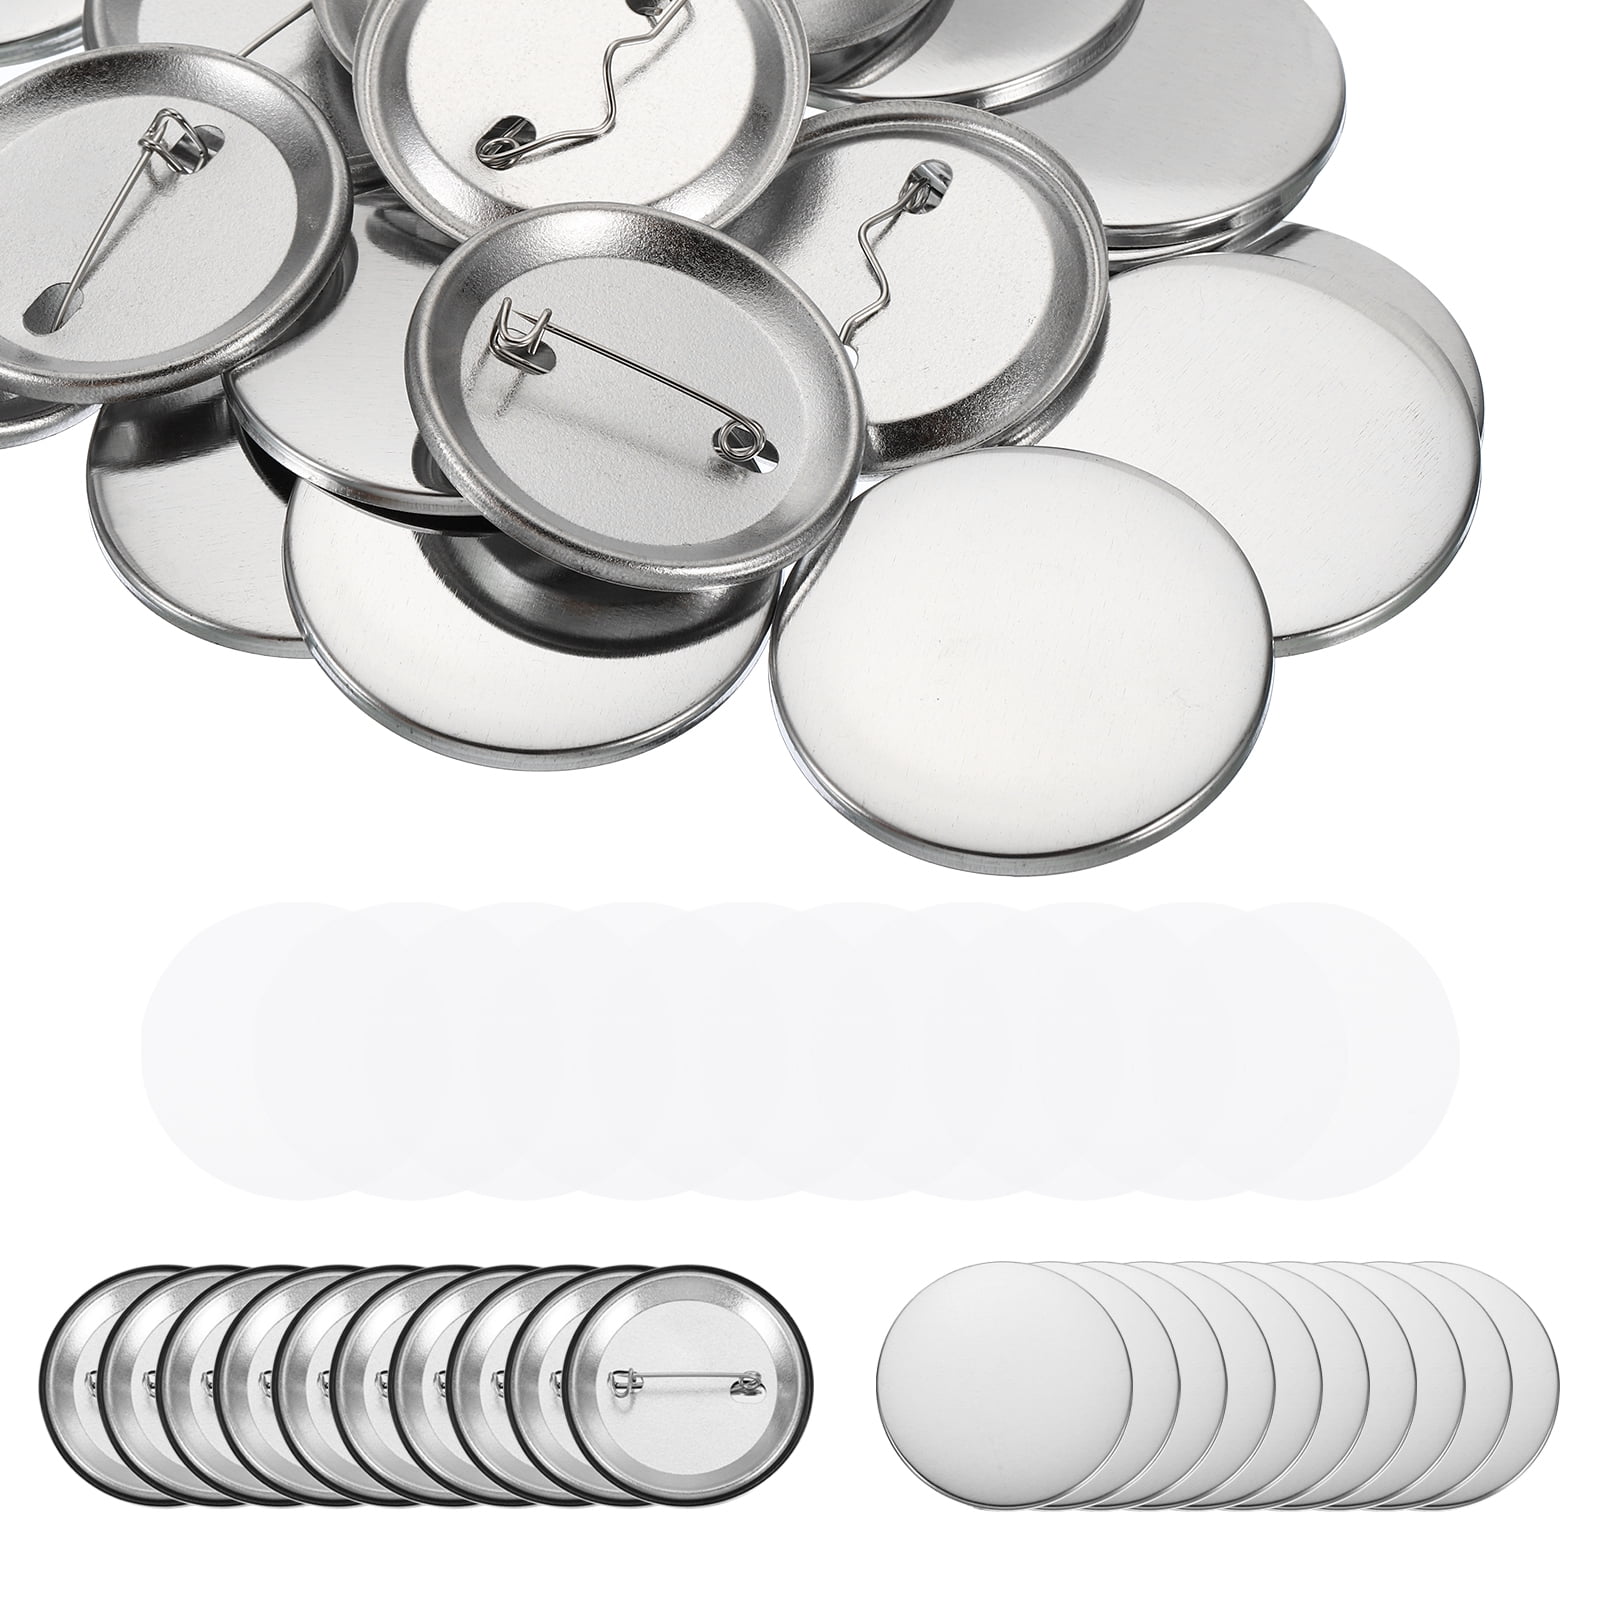 10PCS BLANK FLAT Tray PP Button Maker Supply for Graduation